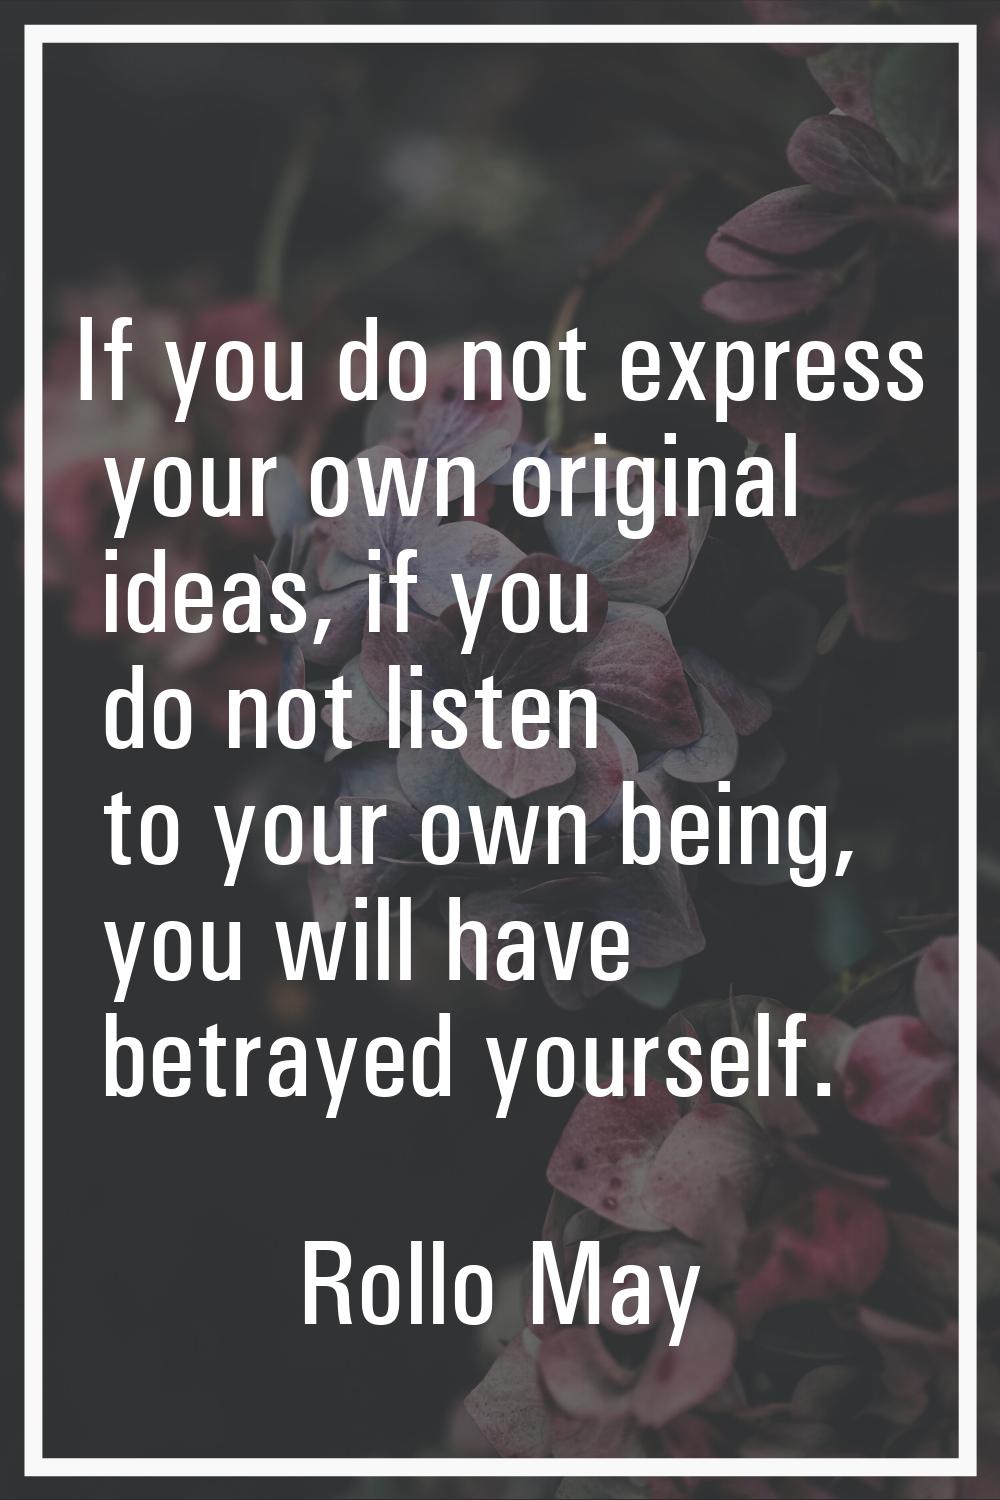 If you do not express your own original ideas, if you do not listen to your own being, you will hav